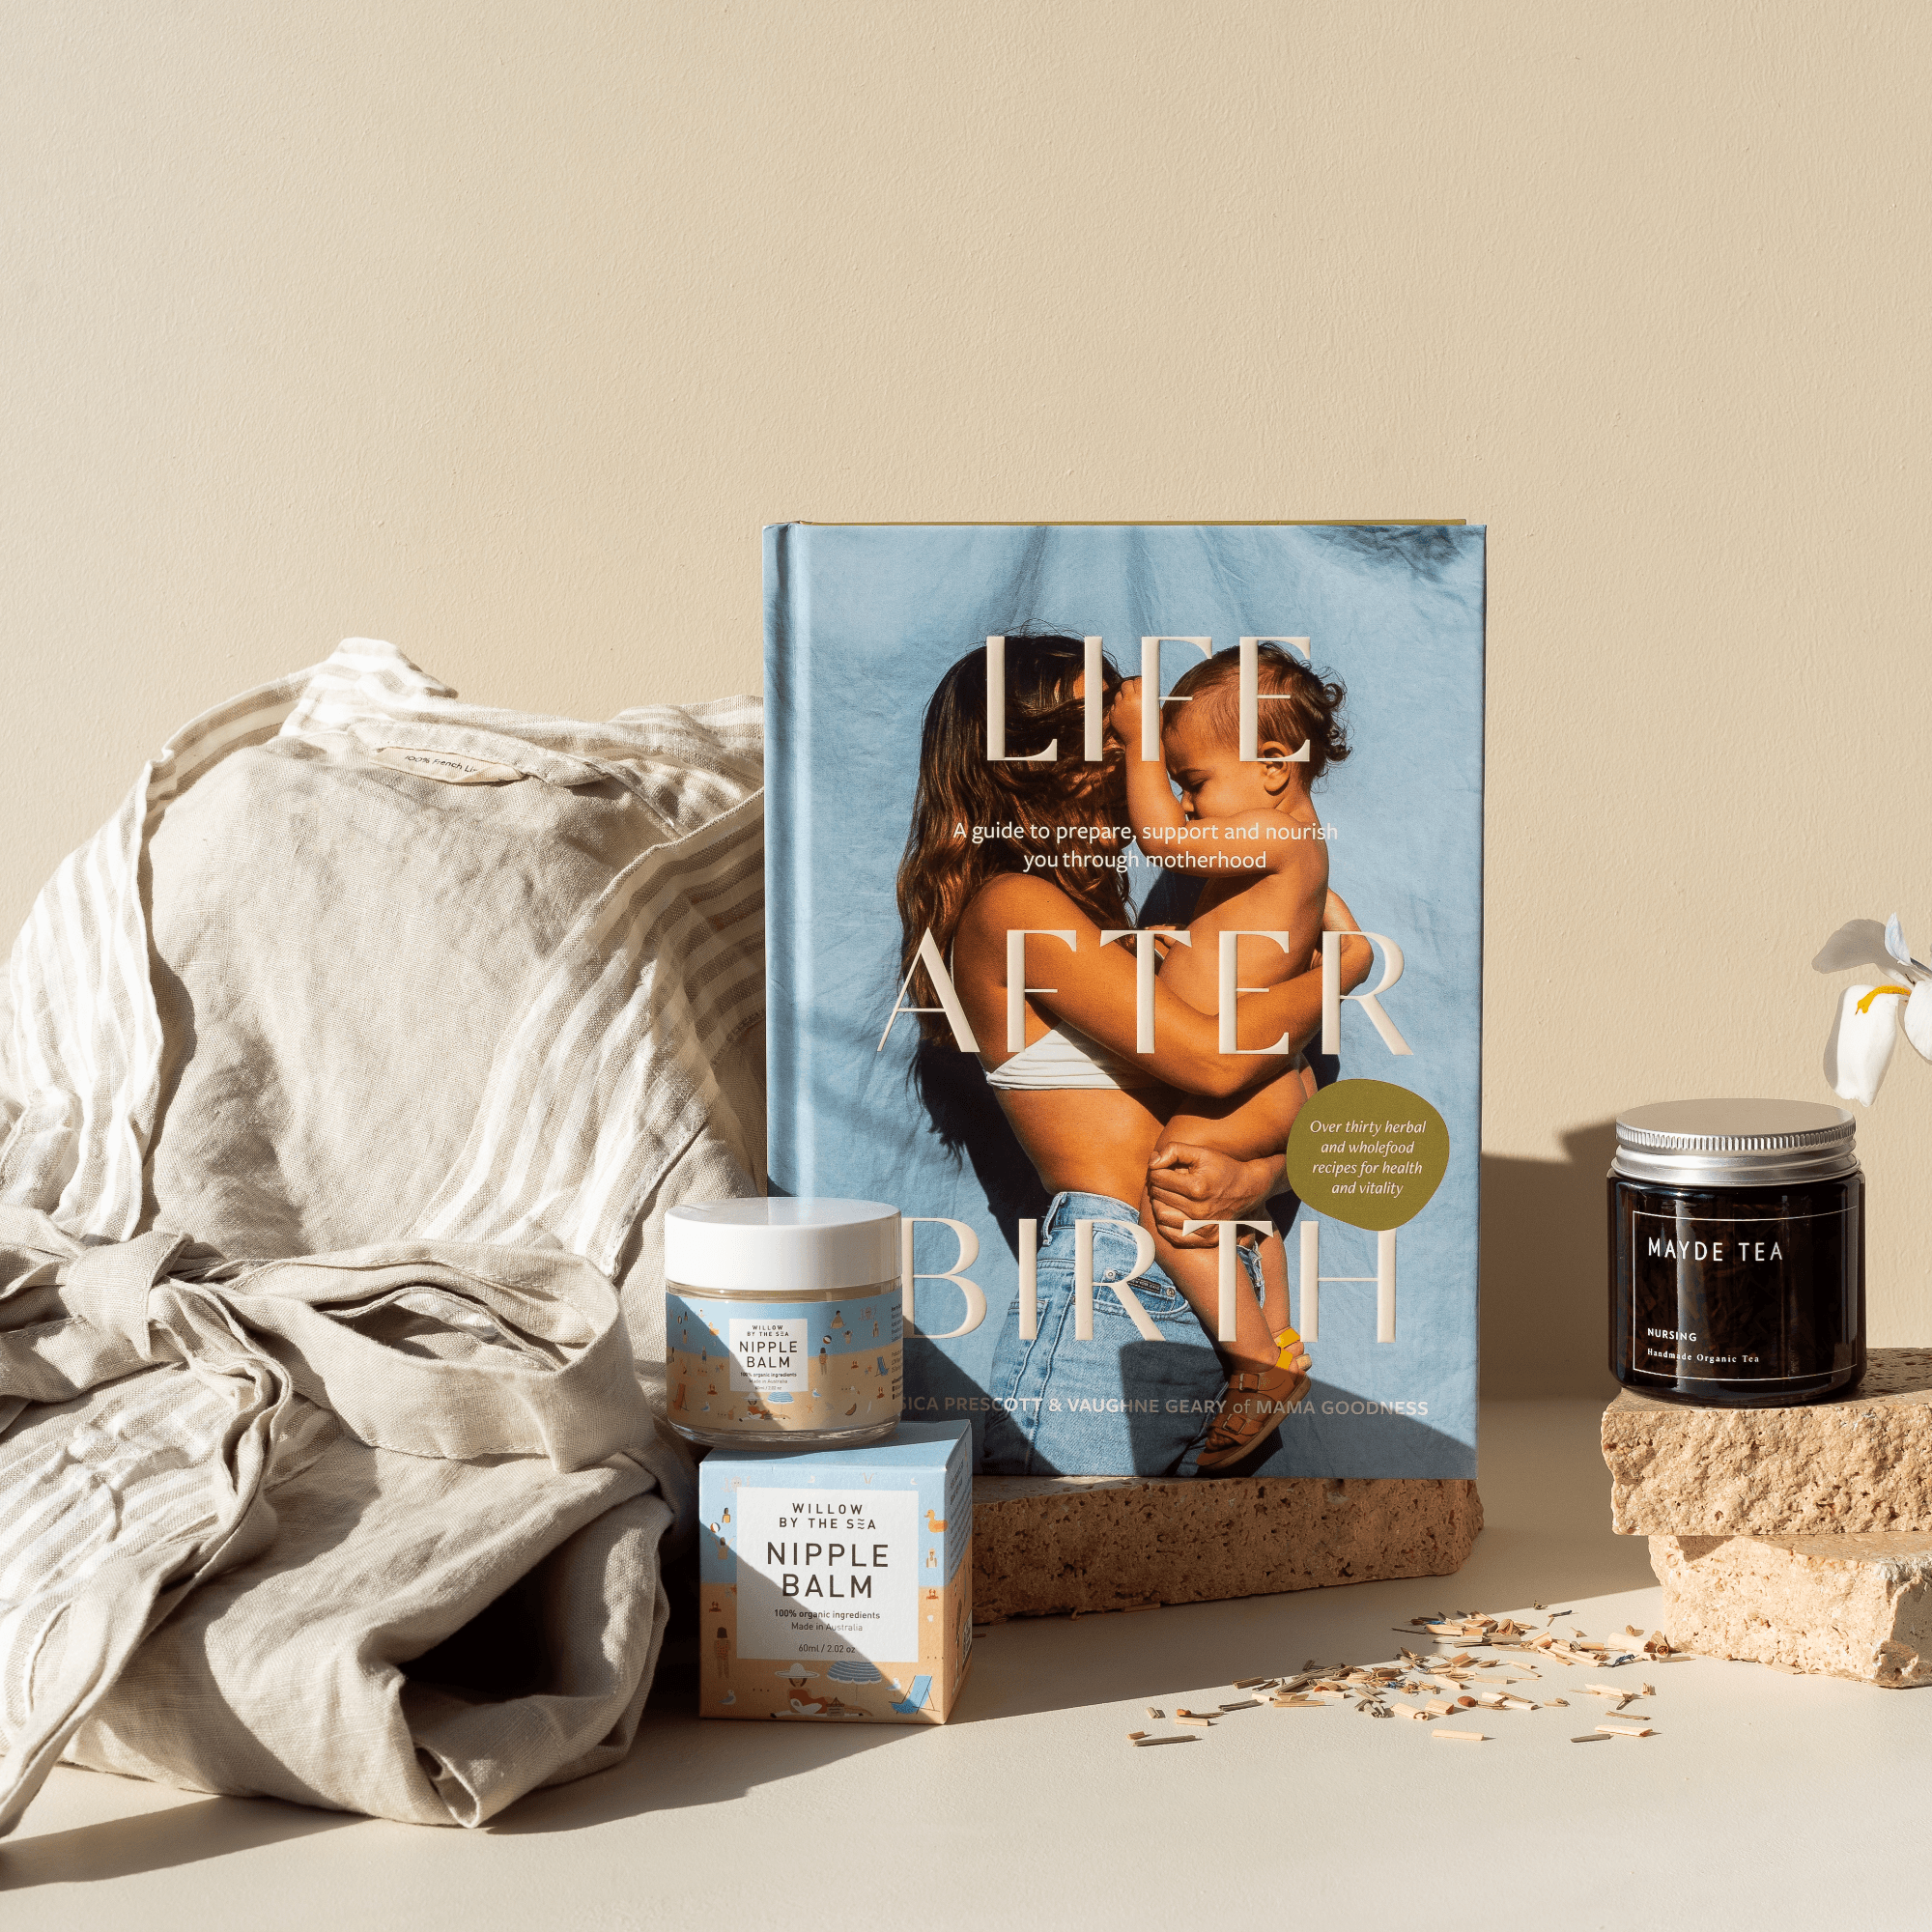 This image shows our Nourish and Nurture gift hamper, with Life After Birth, Mayde Tea, Willow by the Sea Nipple Balm and Carlotta and Gee's Natural colour linen robe. 